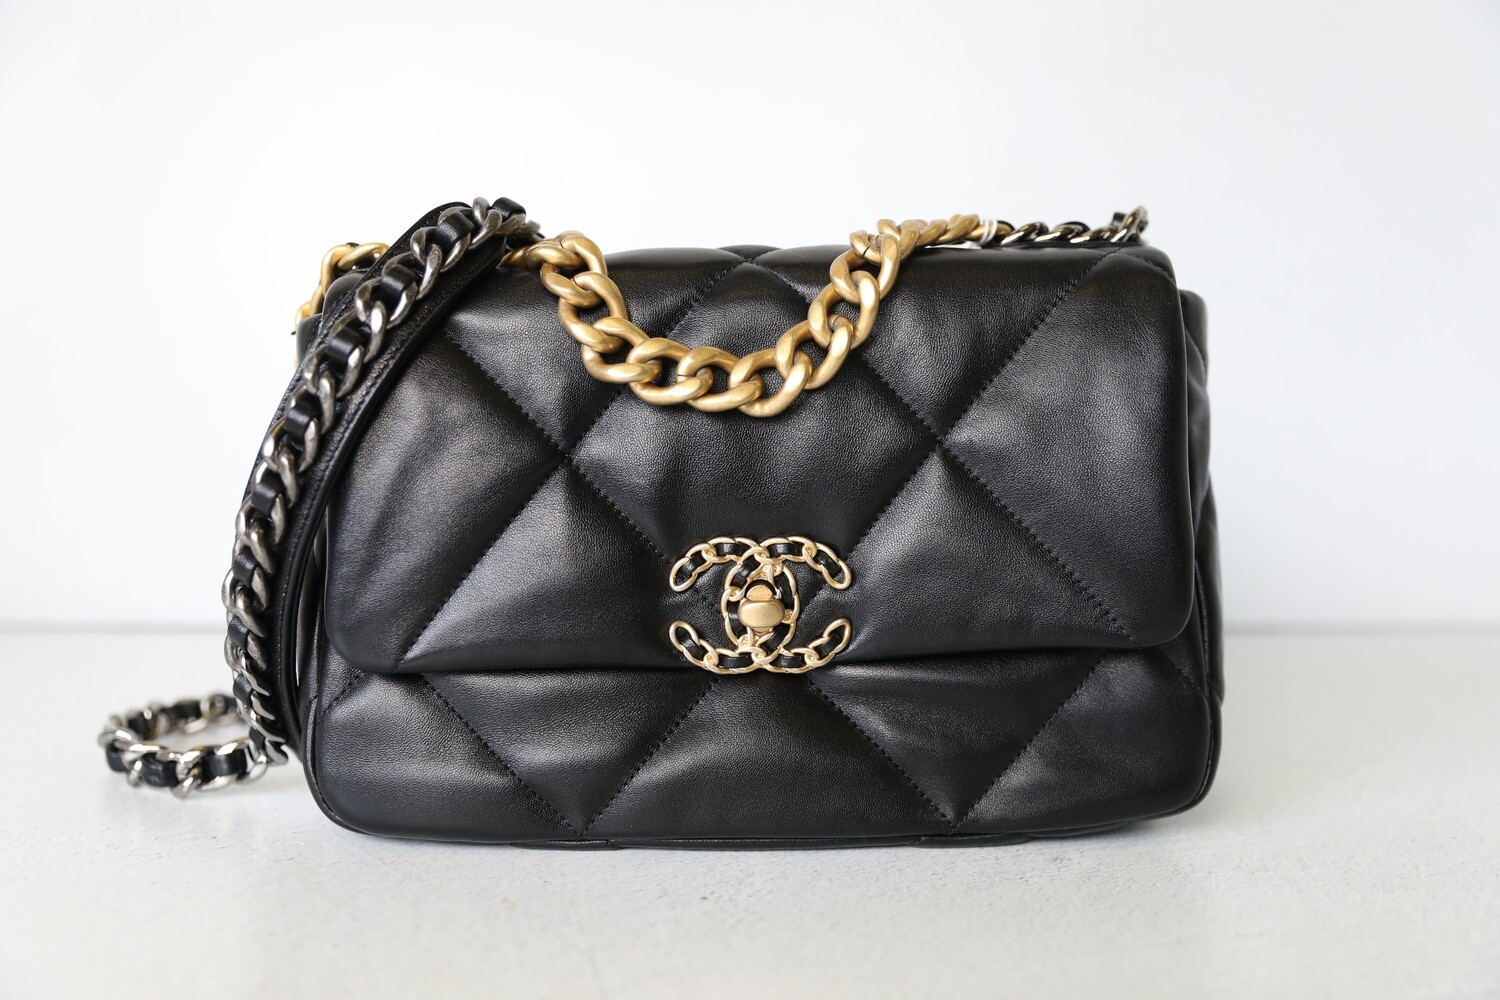 Chanel 19 Small, Black Leather with Mixed Tone Hardware, Preowned in Box  WA001